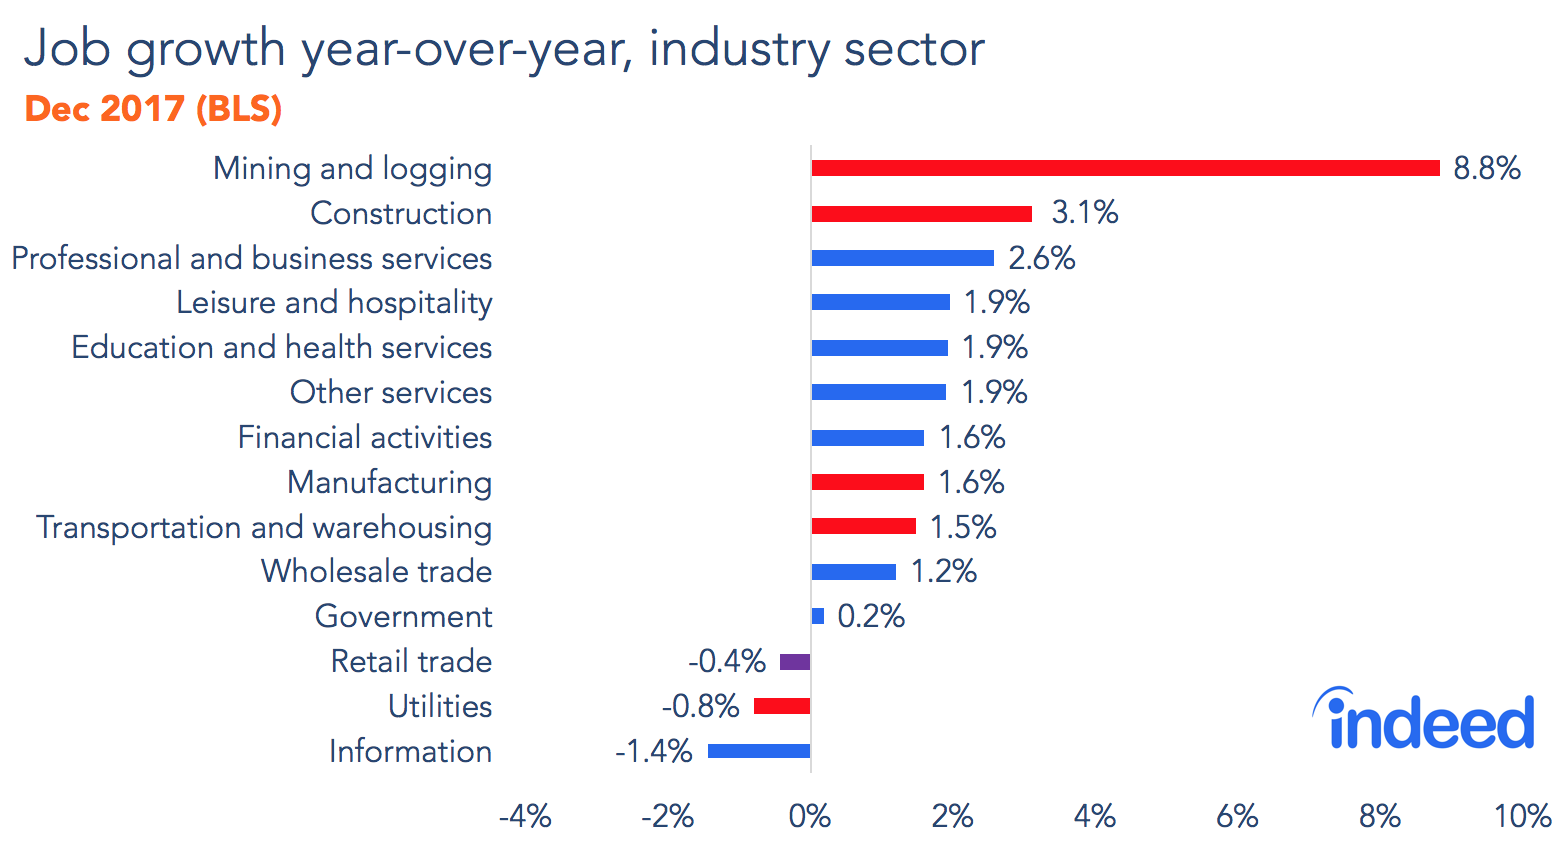 Bar chart shows that the mining and logging sector have had the most year-over-year growth.